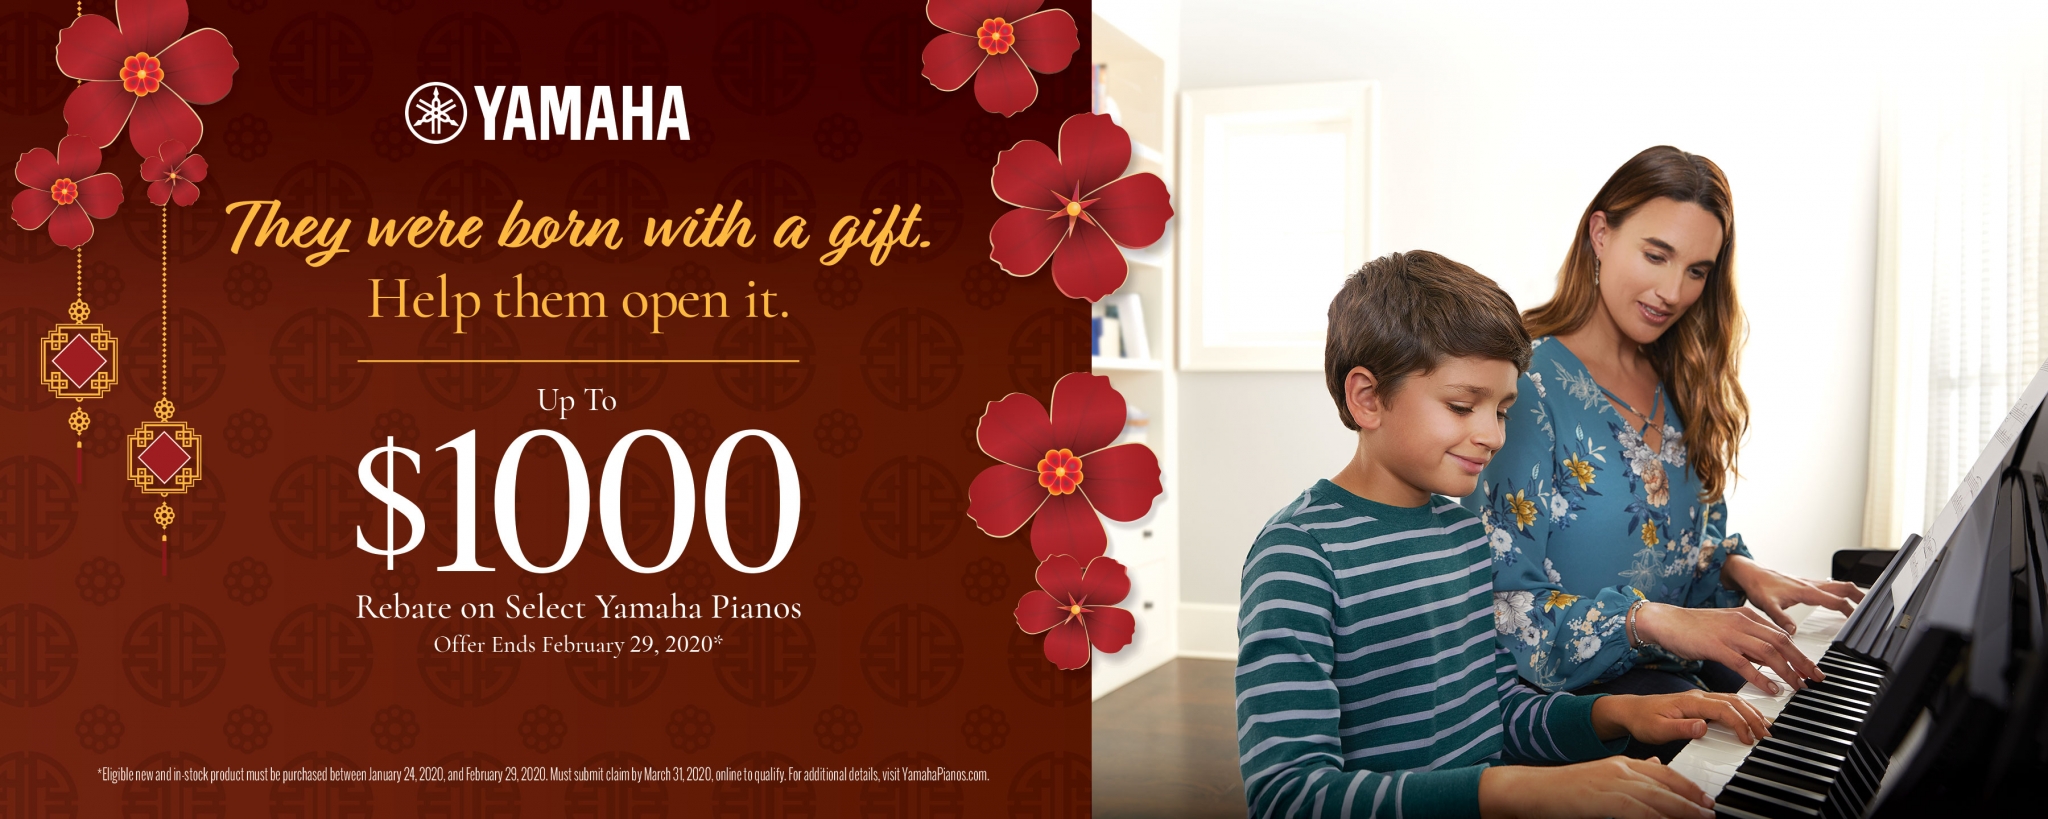 Yamaha They were born with a gift help them open it. Up to $1,000 REbate on Select Yamaha Pianos . Offer ends Feb. 29, 2020